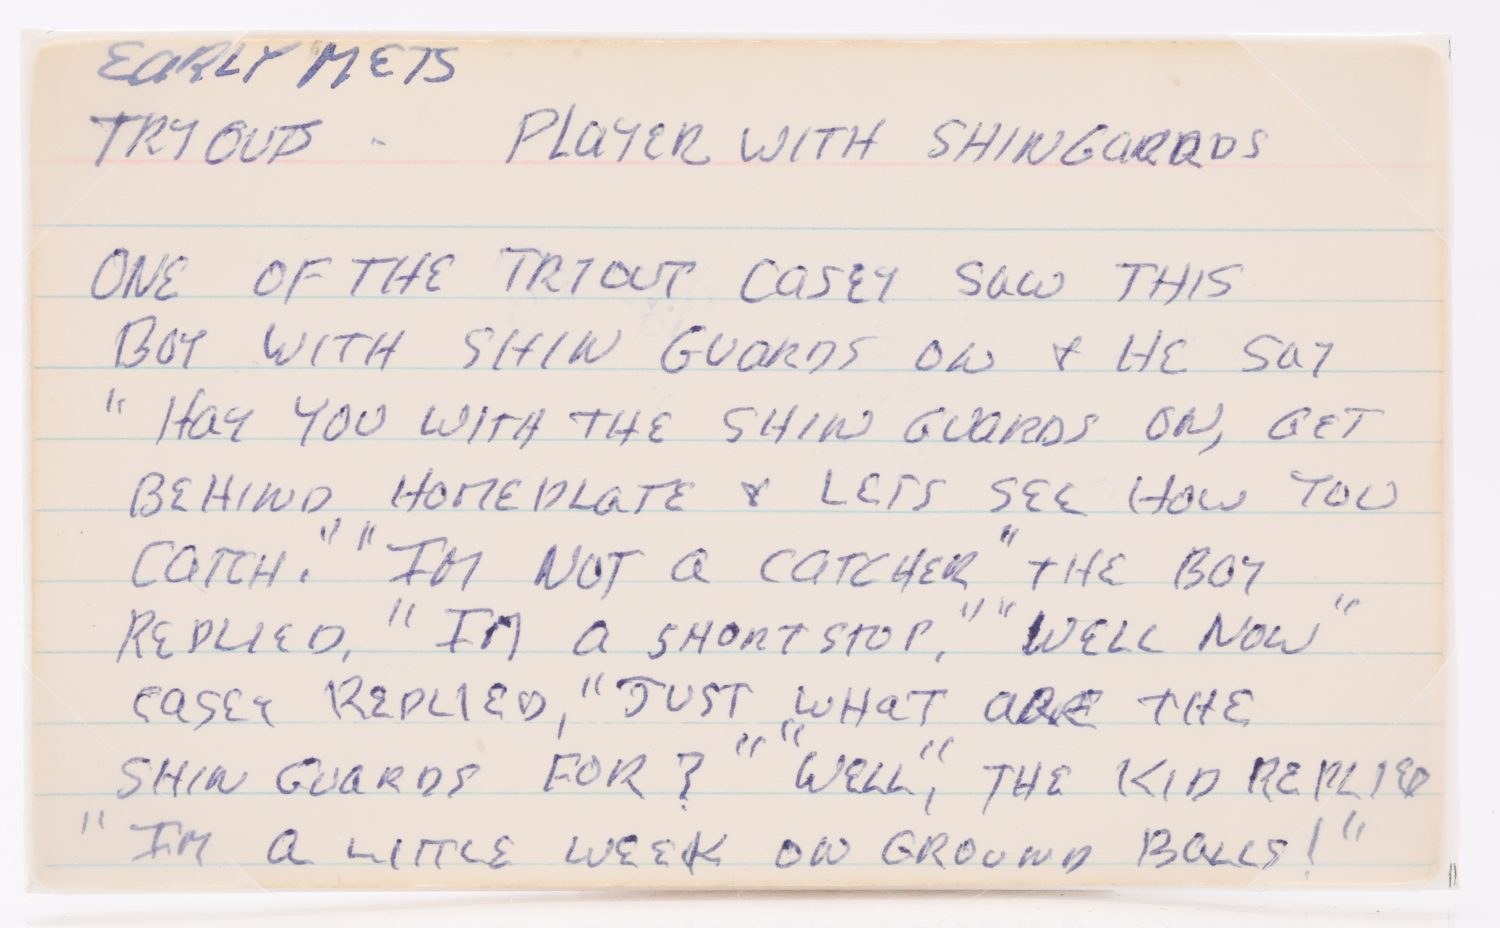 Index Card with Story About Casey Stengel